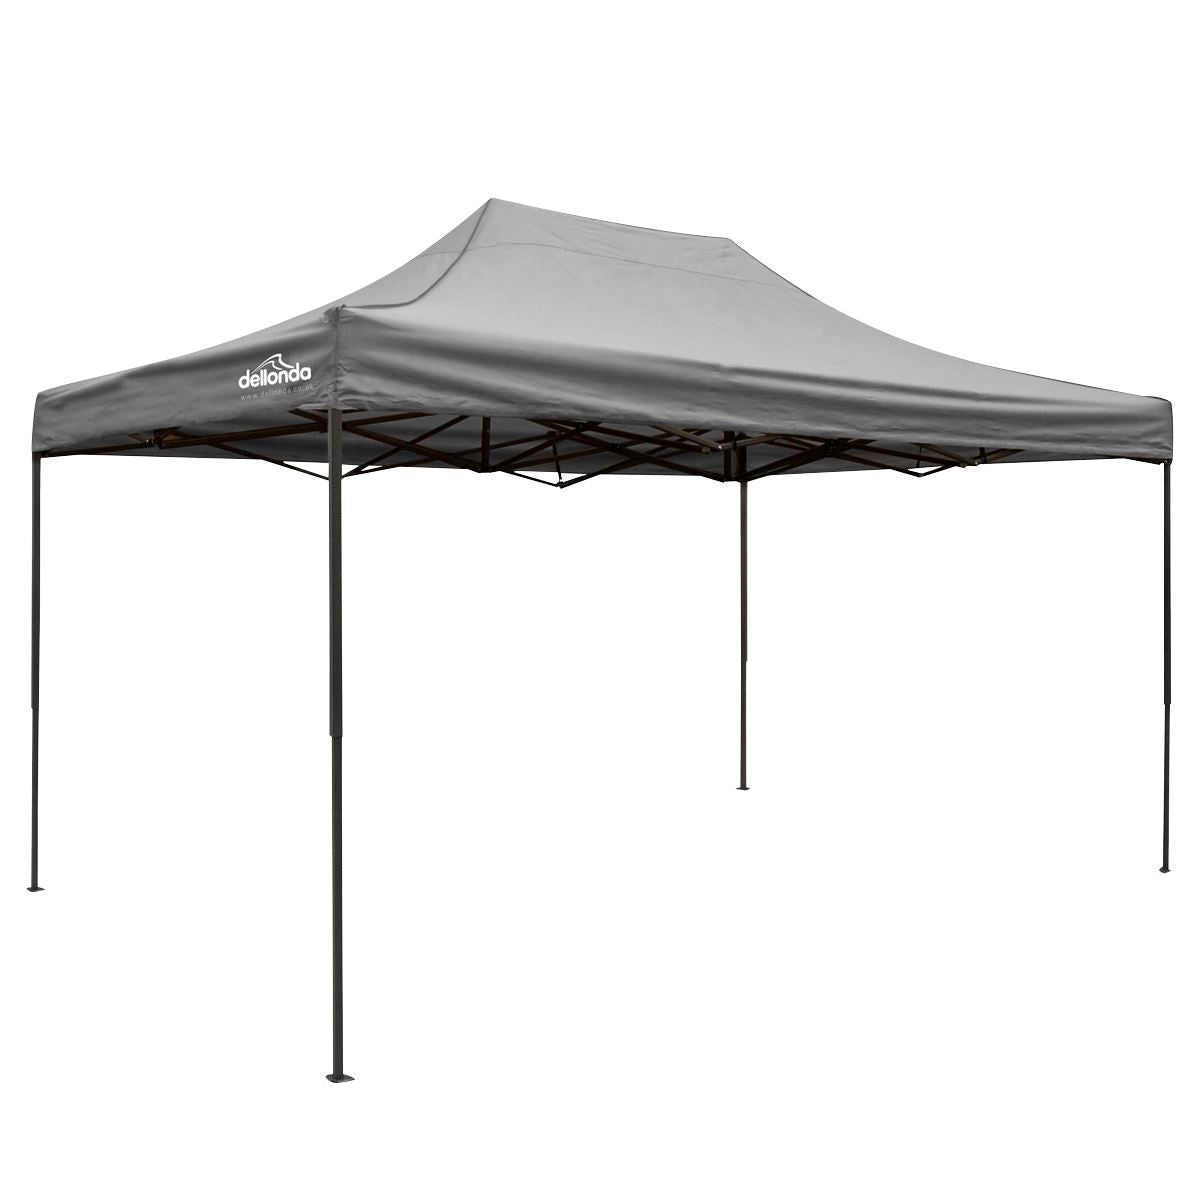 Dellonda Premium 3 x 4.5m Pop-Up Gazebo, Heavy Duty, PVC Coated, Water Resistant Fabric, Supplied with Carry Bag, Rope, Stakes & Weight Bags - Grey Canopy